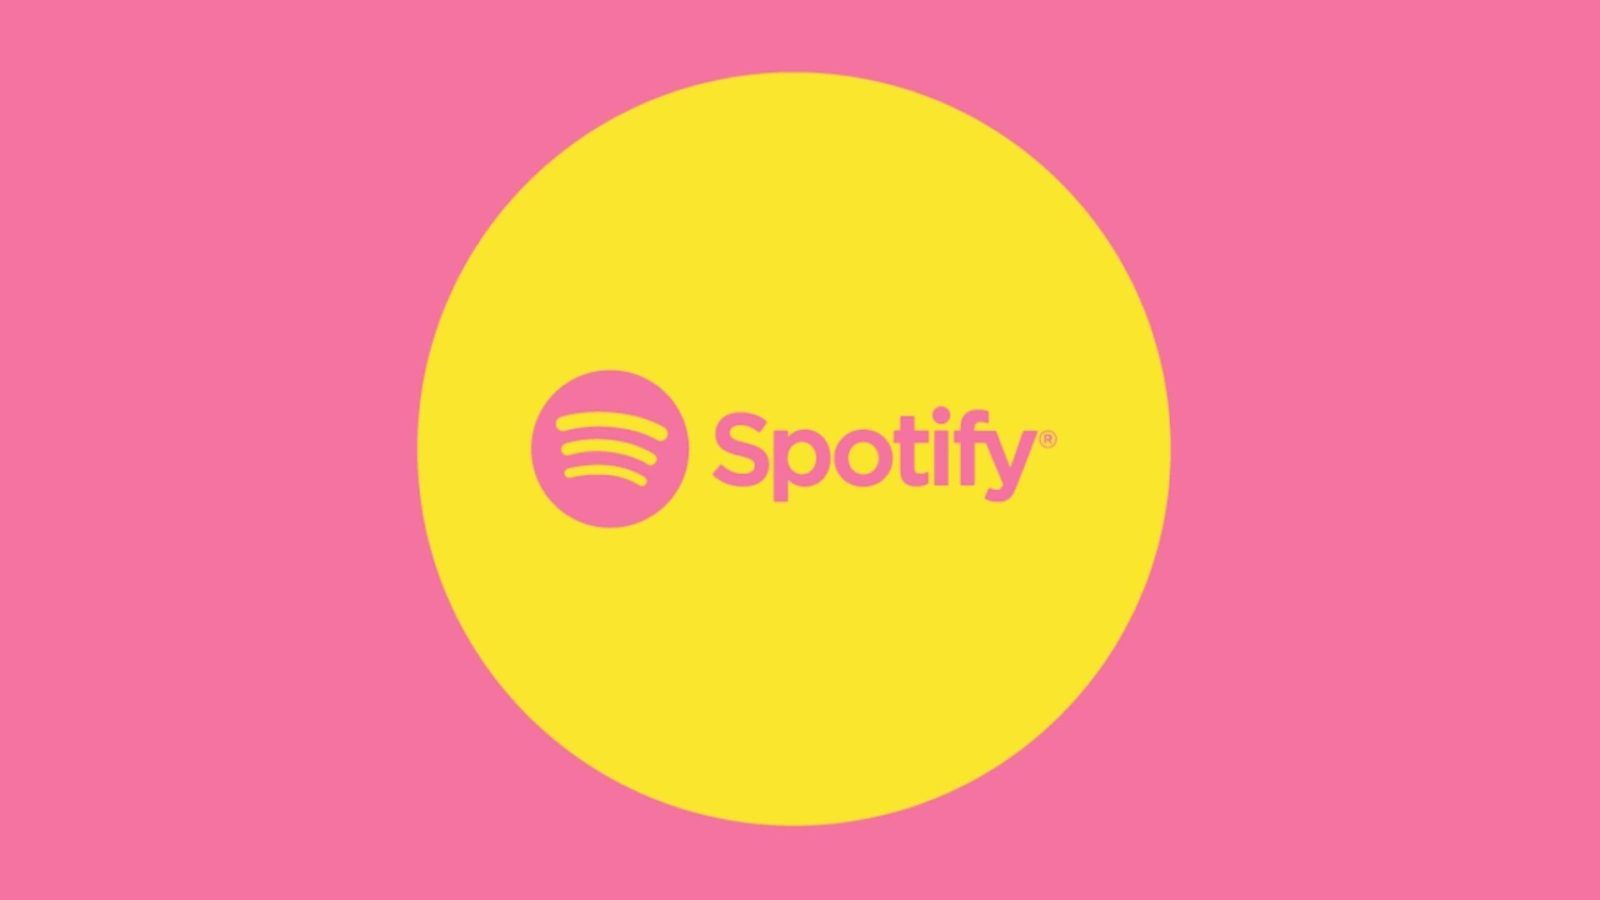 All the updates introduced on Spotify in 2022